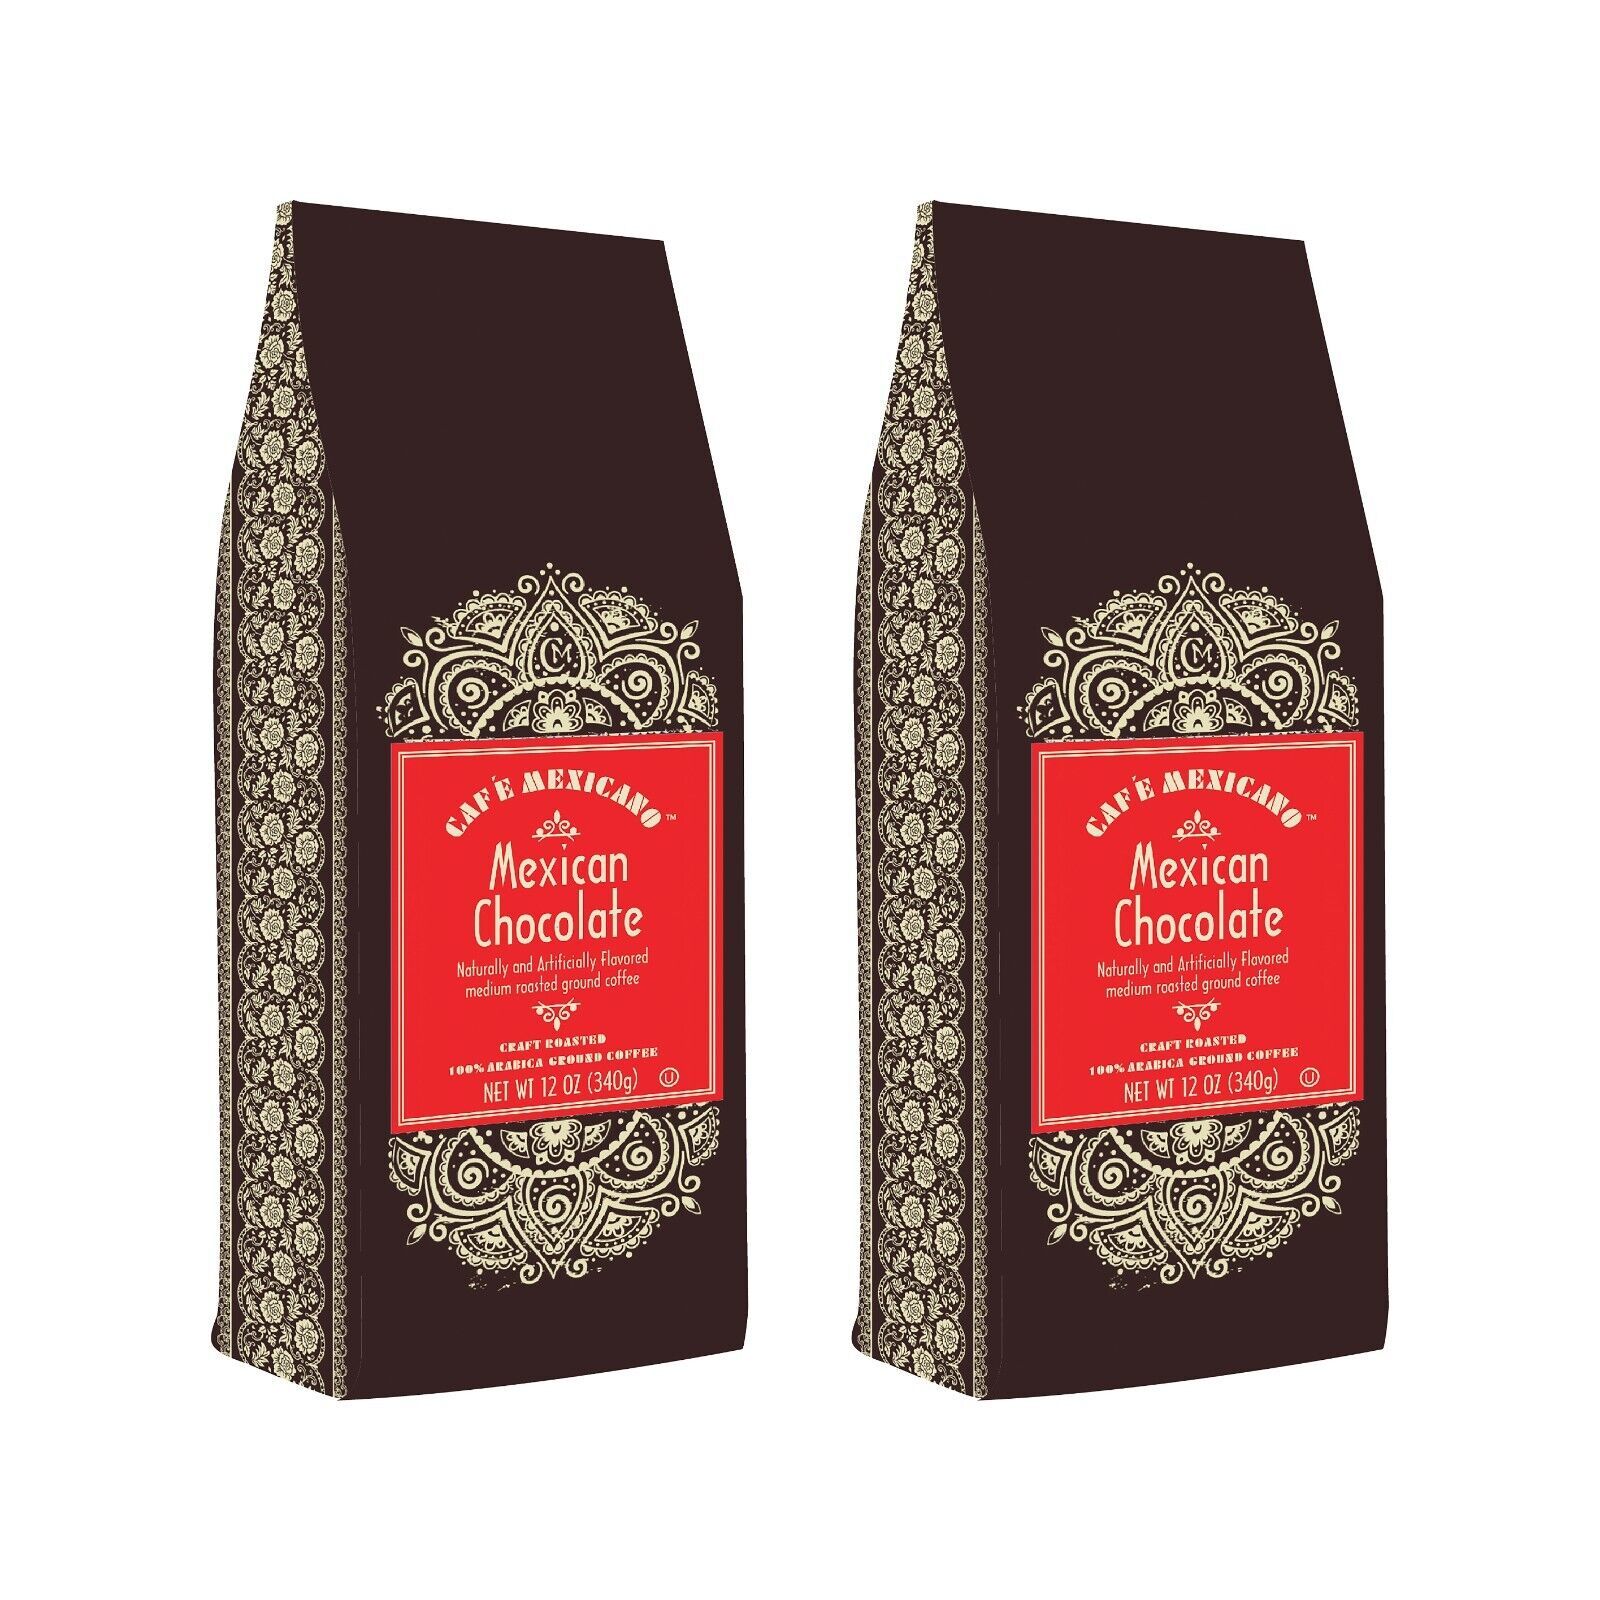 Primary image for Café Mexicano Coffee, Mexican Chocolate, 100% Arabica Craft Roasted, 2x12oz bags